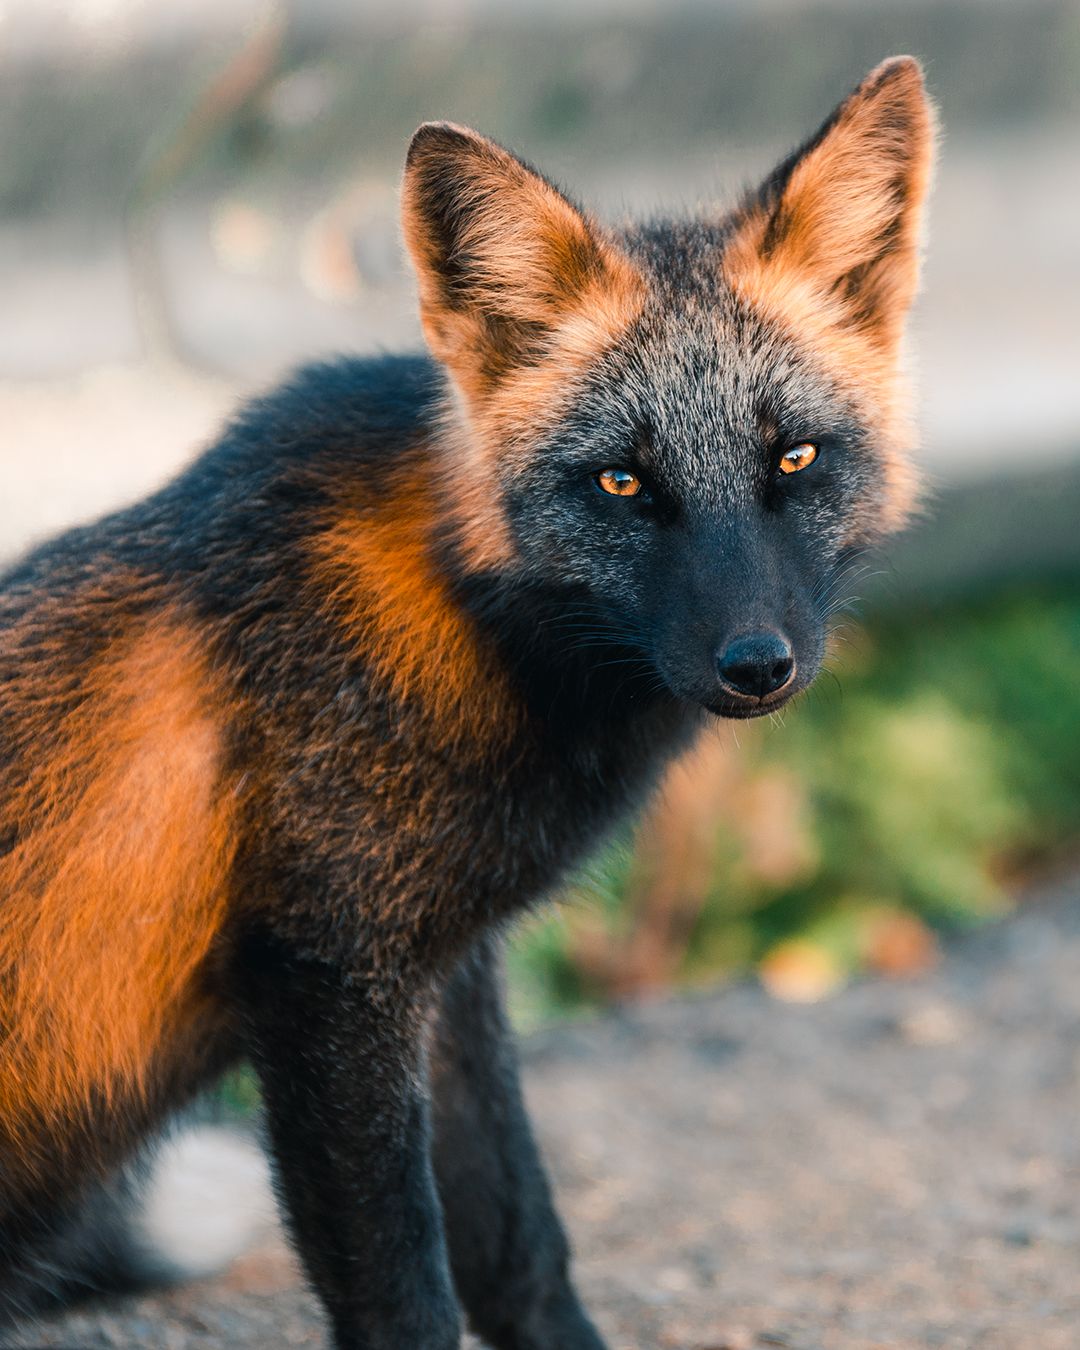 Incredible Photos Of Cross Fox Go Viral After People Say It Looks Like A Pokemon